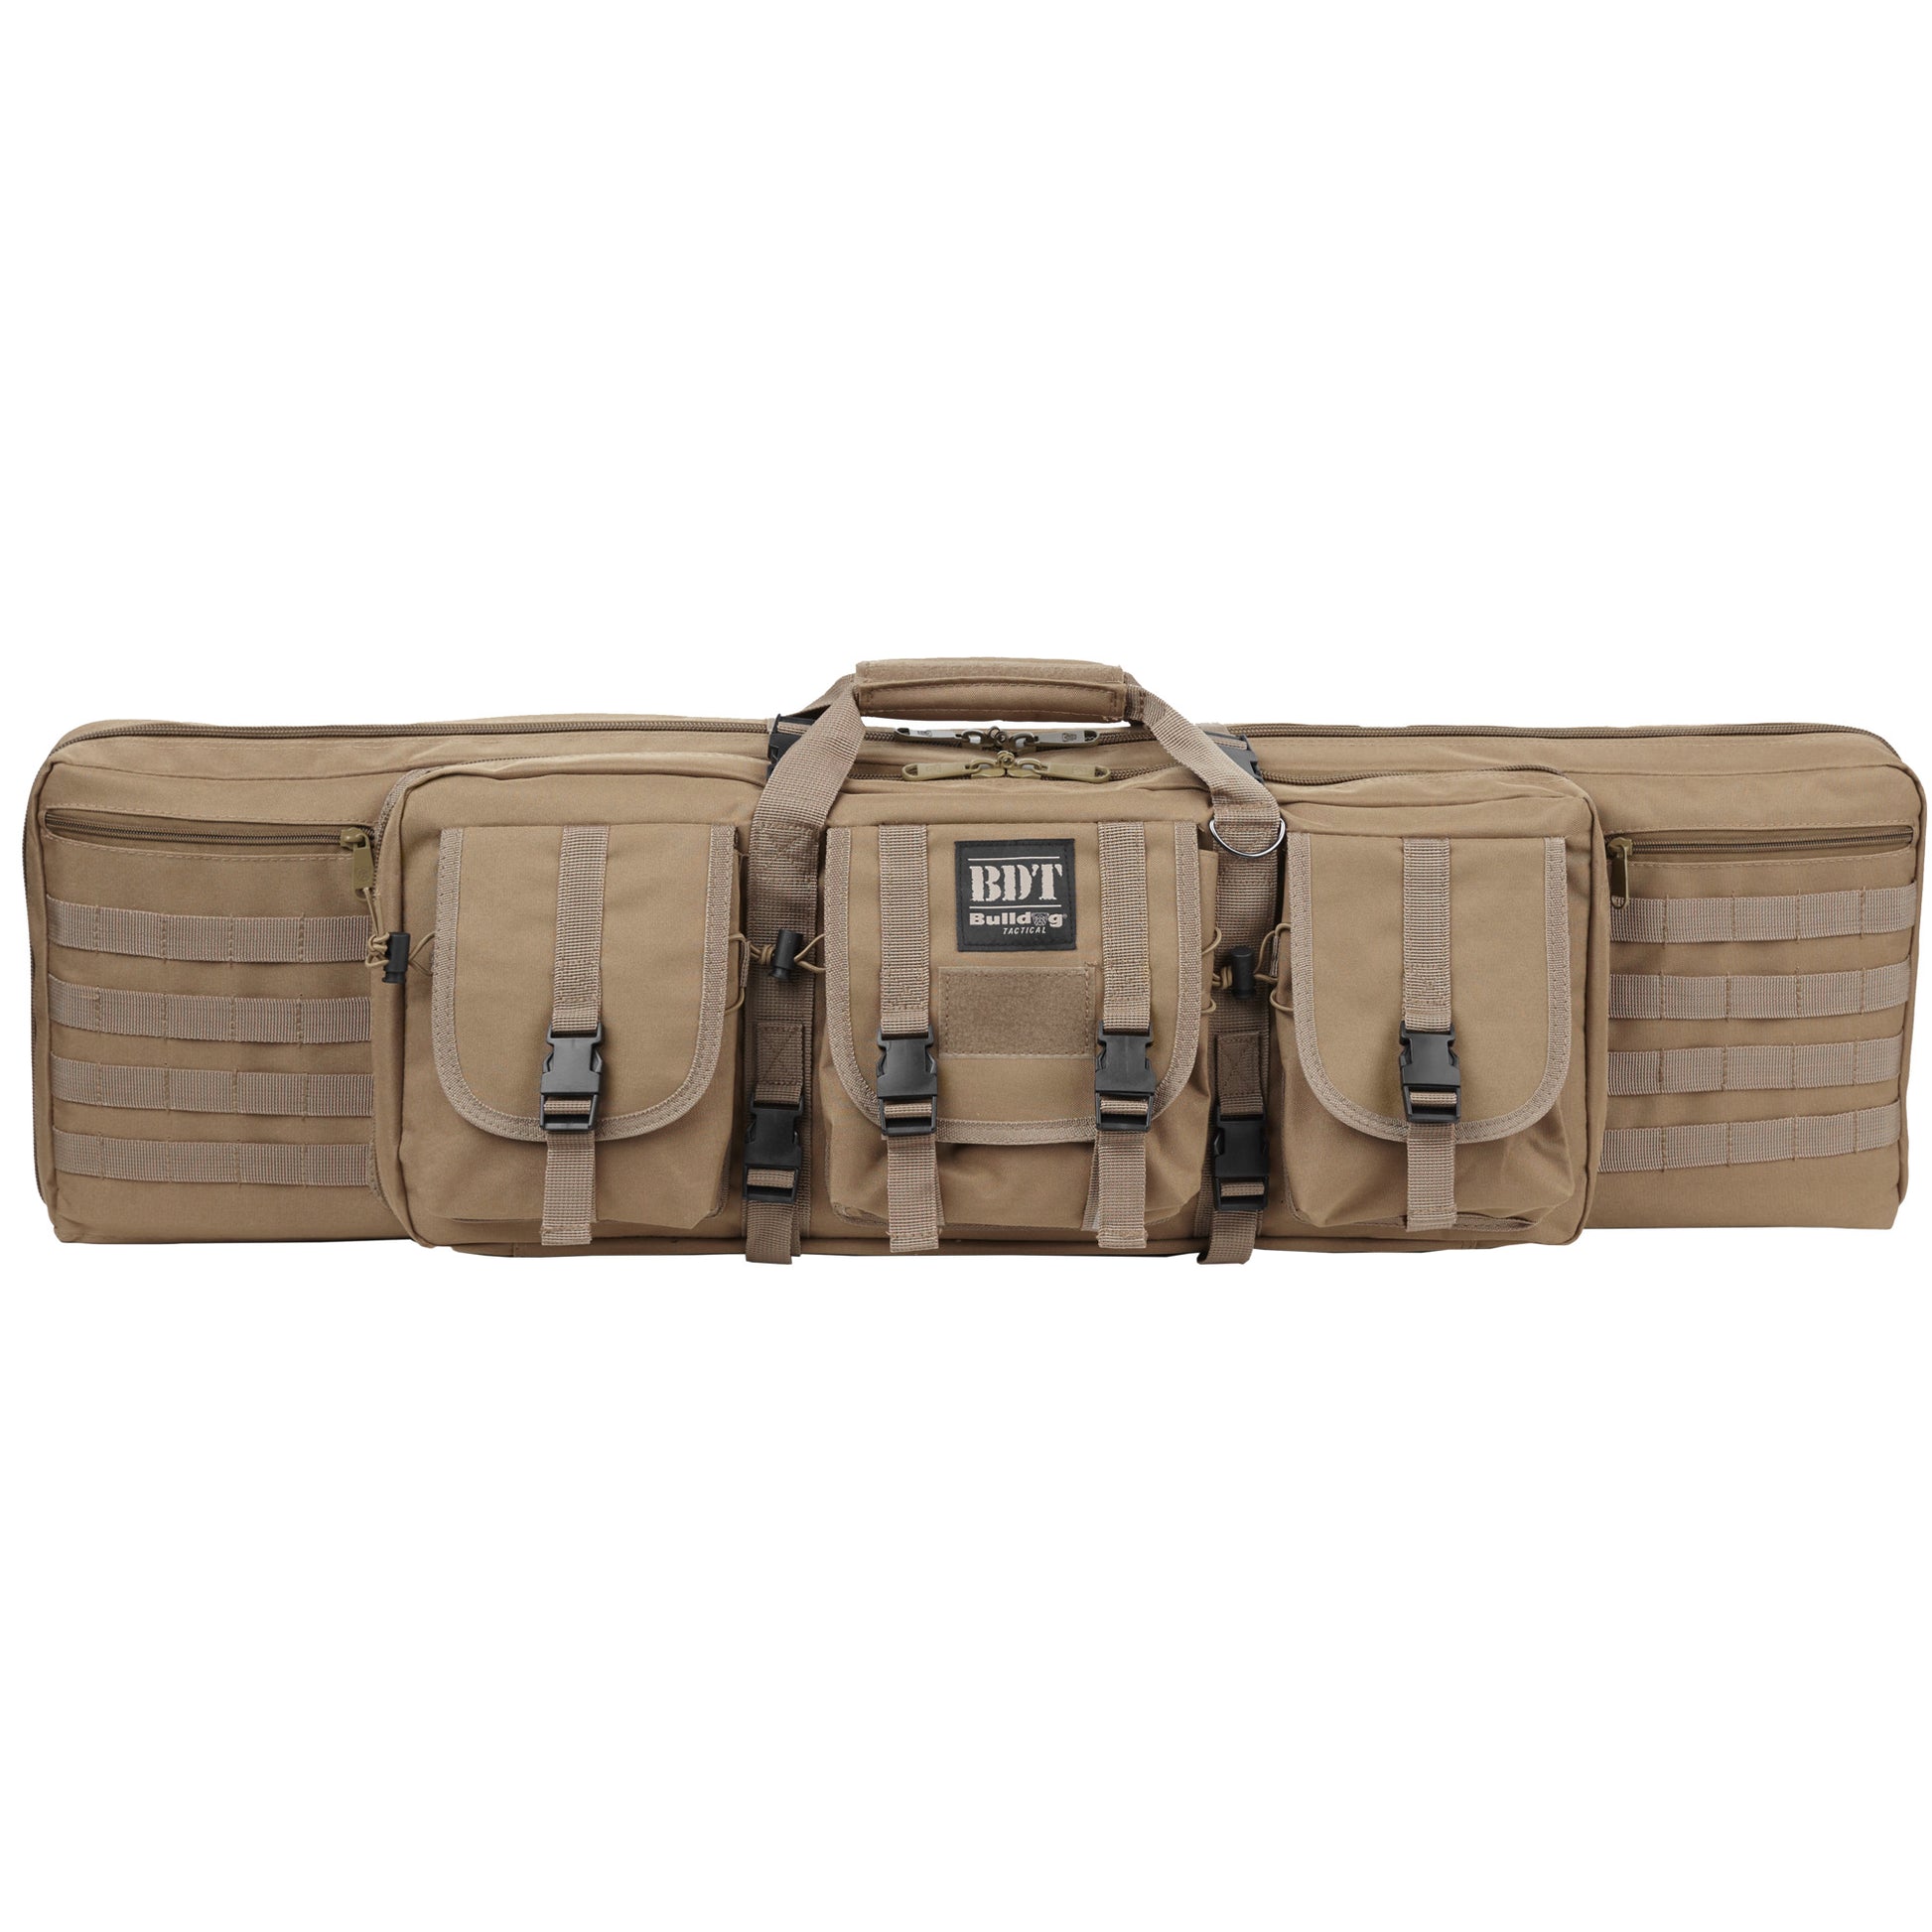 Bulldog Cases Deluxe Tactical Rifle Case Fits Single Rifle 36" Tan BDT35-36T - California Shooting Supplies